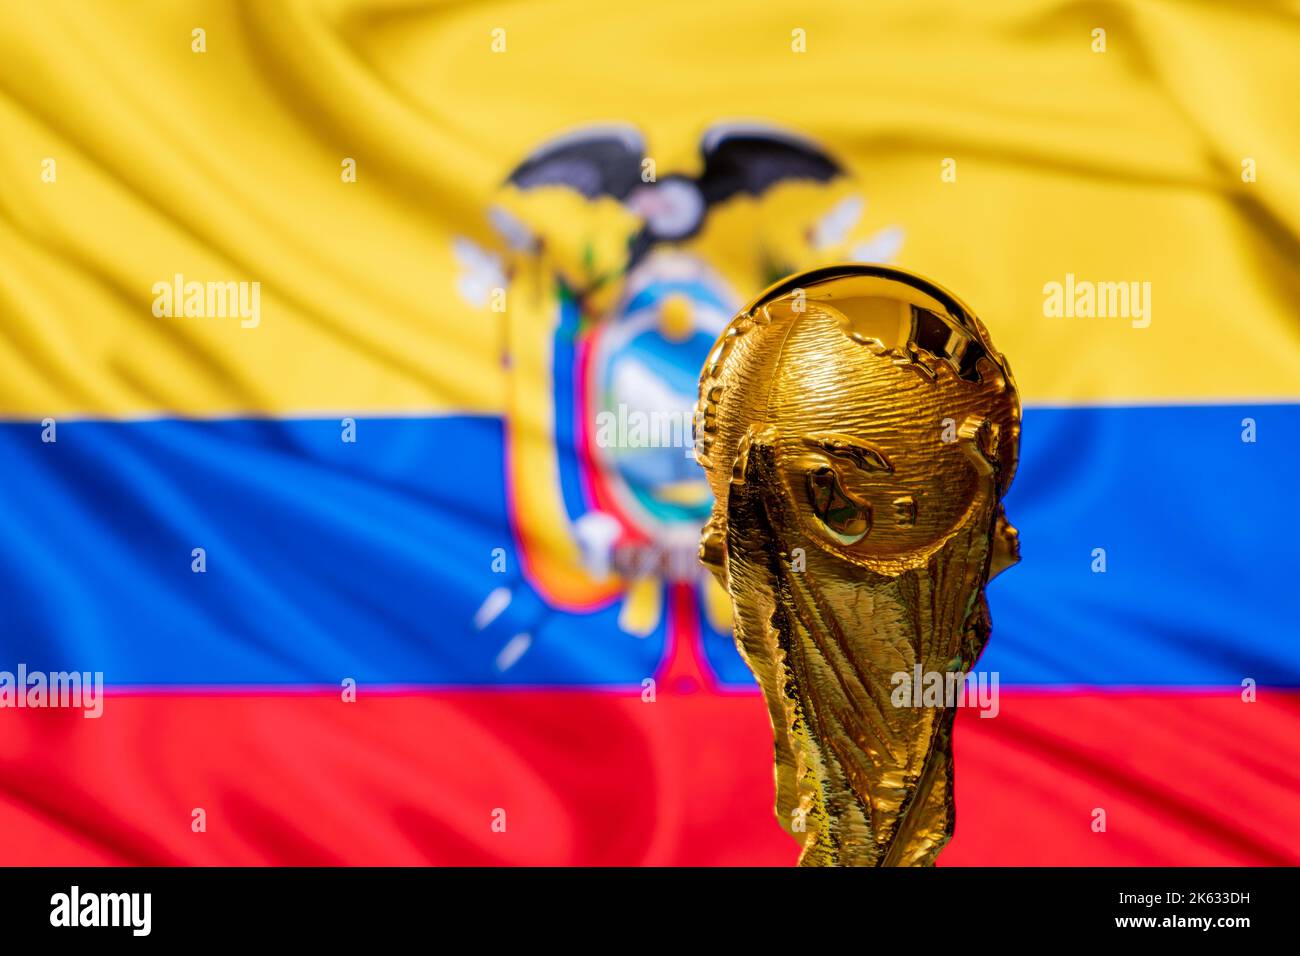 FIFA World Cup trophy against the background of Ecuador flag. Stock Photo